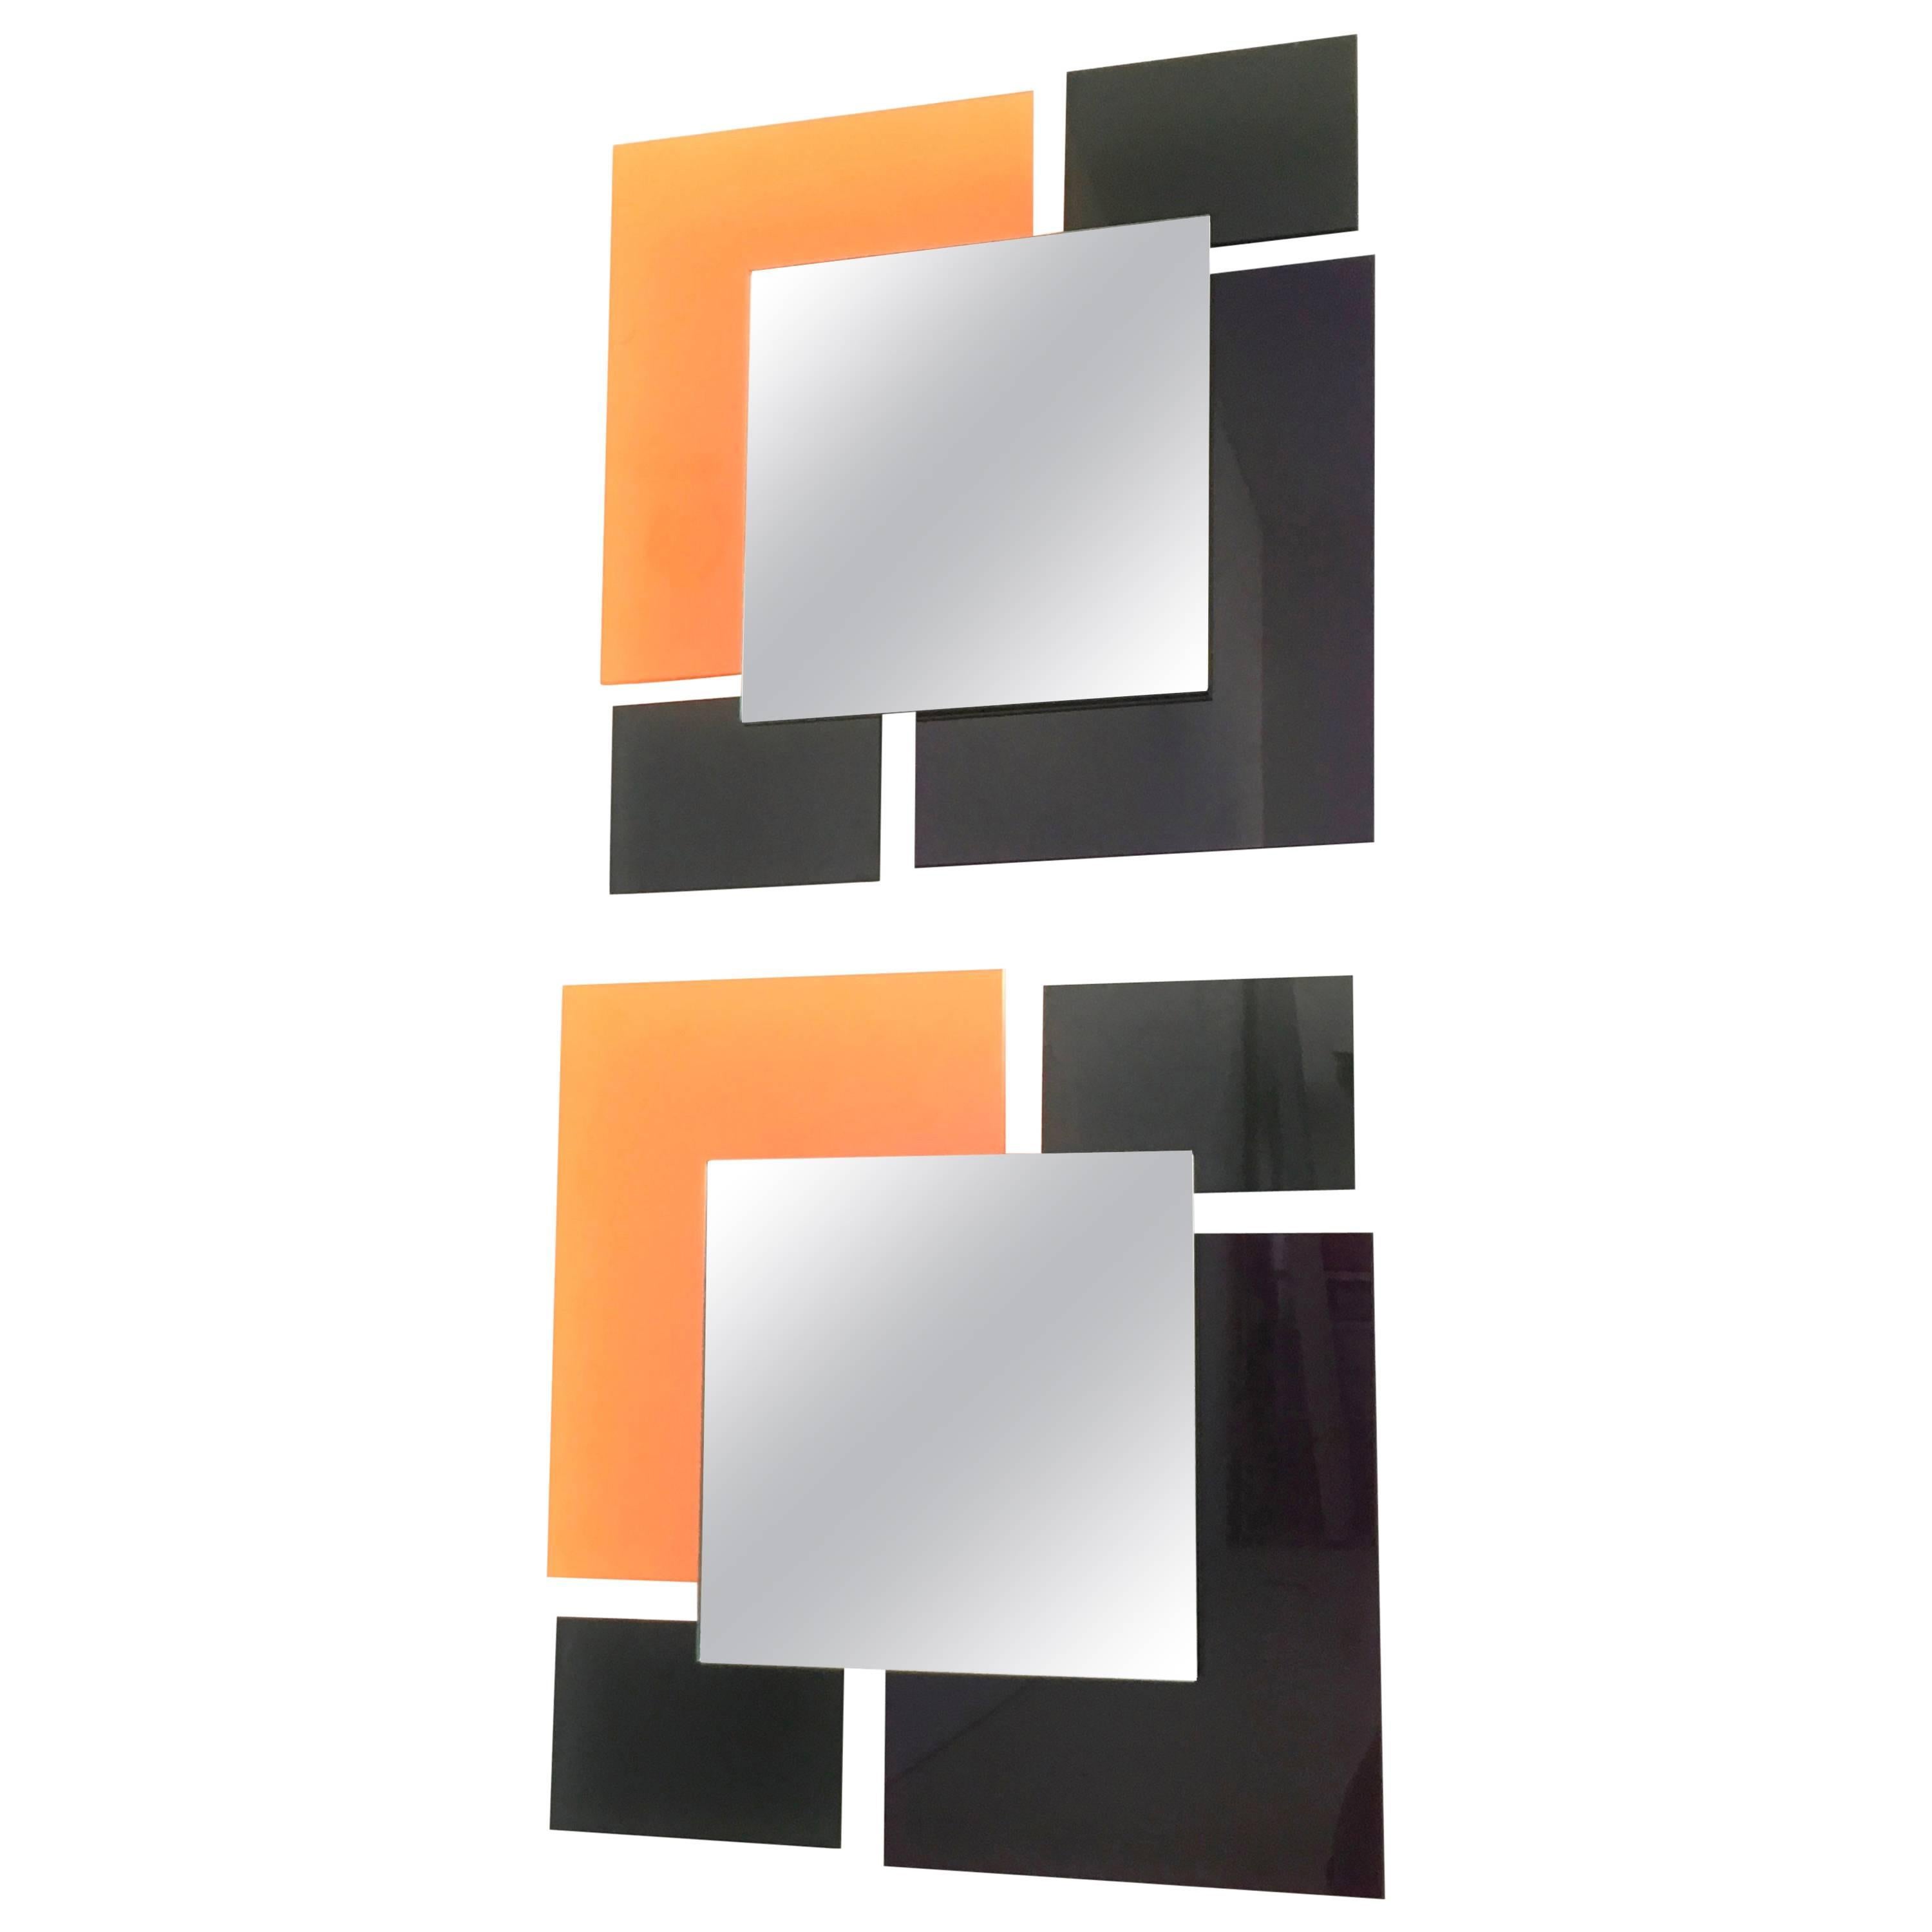 Pair of Postmodern Black and Orange Wall Mirrors in the Style of Sottsass, 1980s For Sale